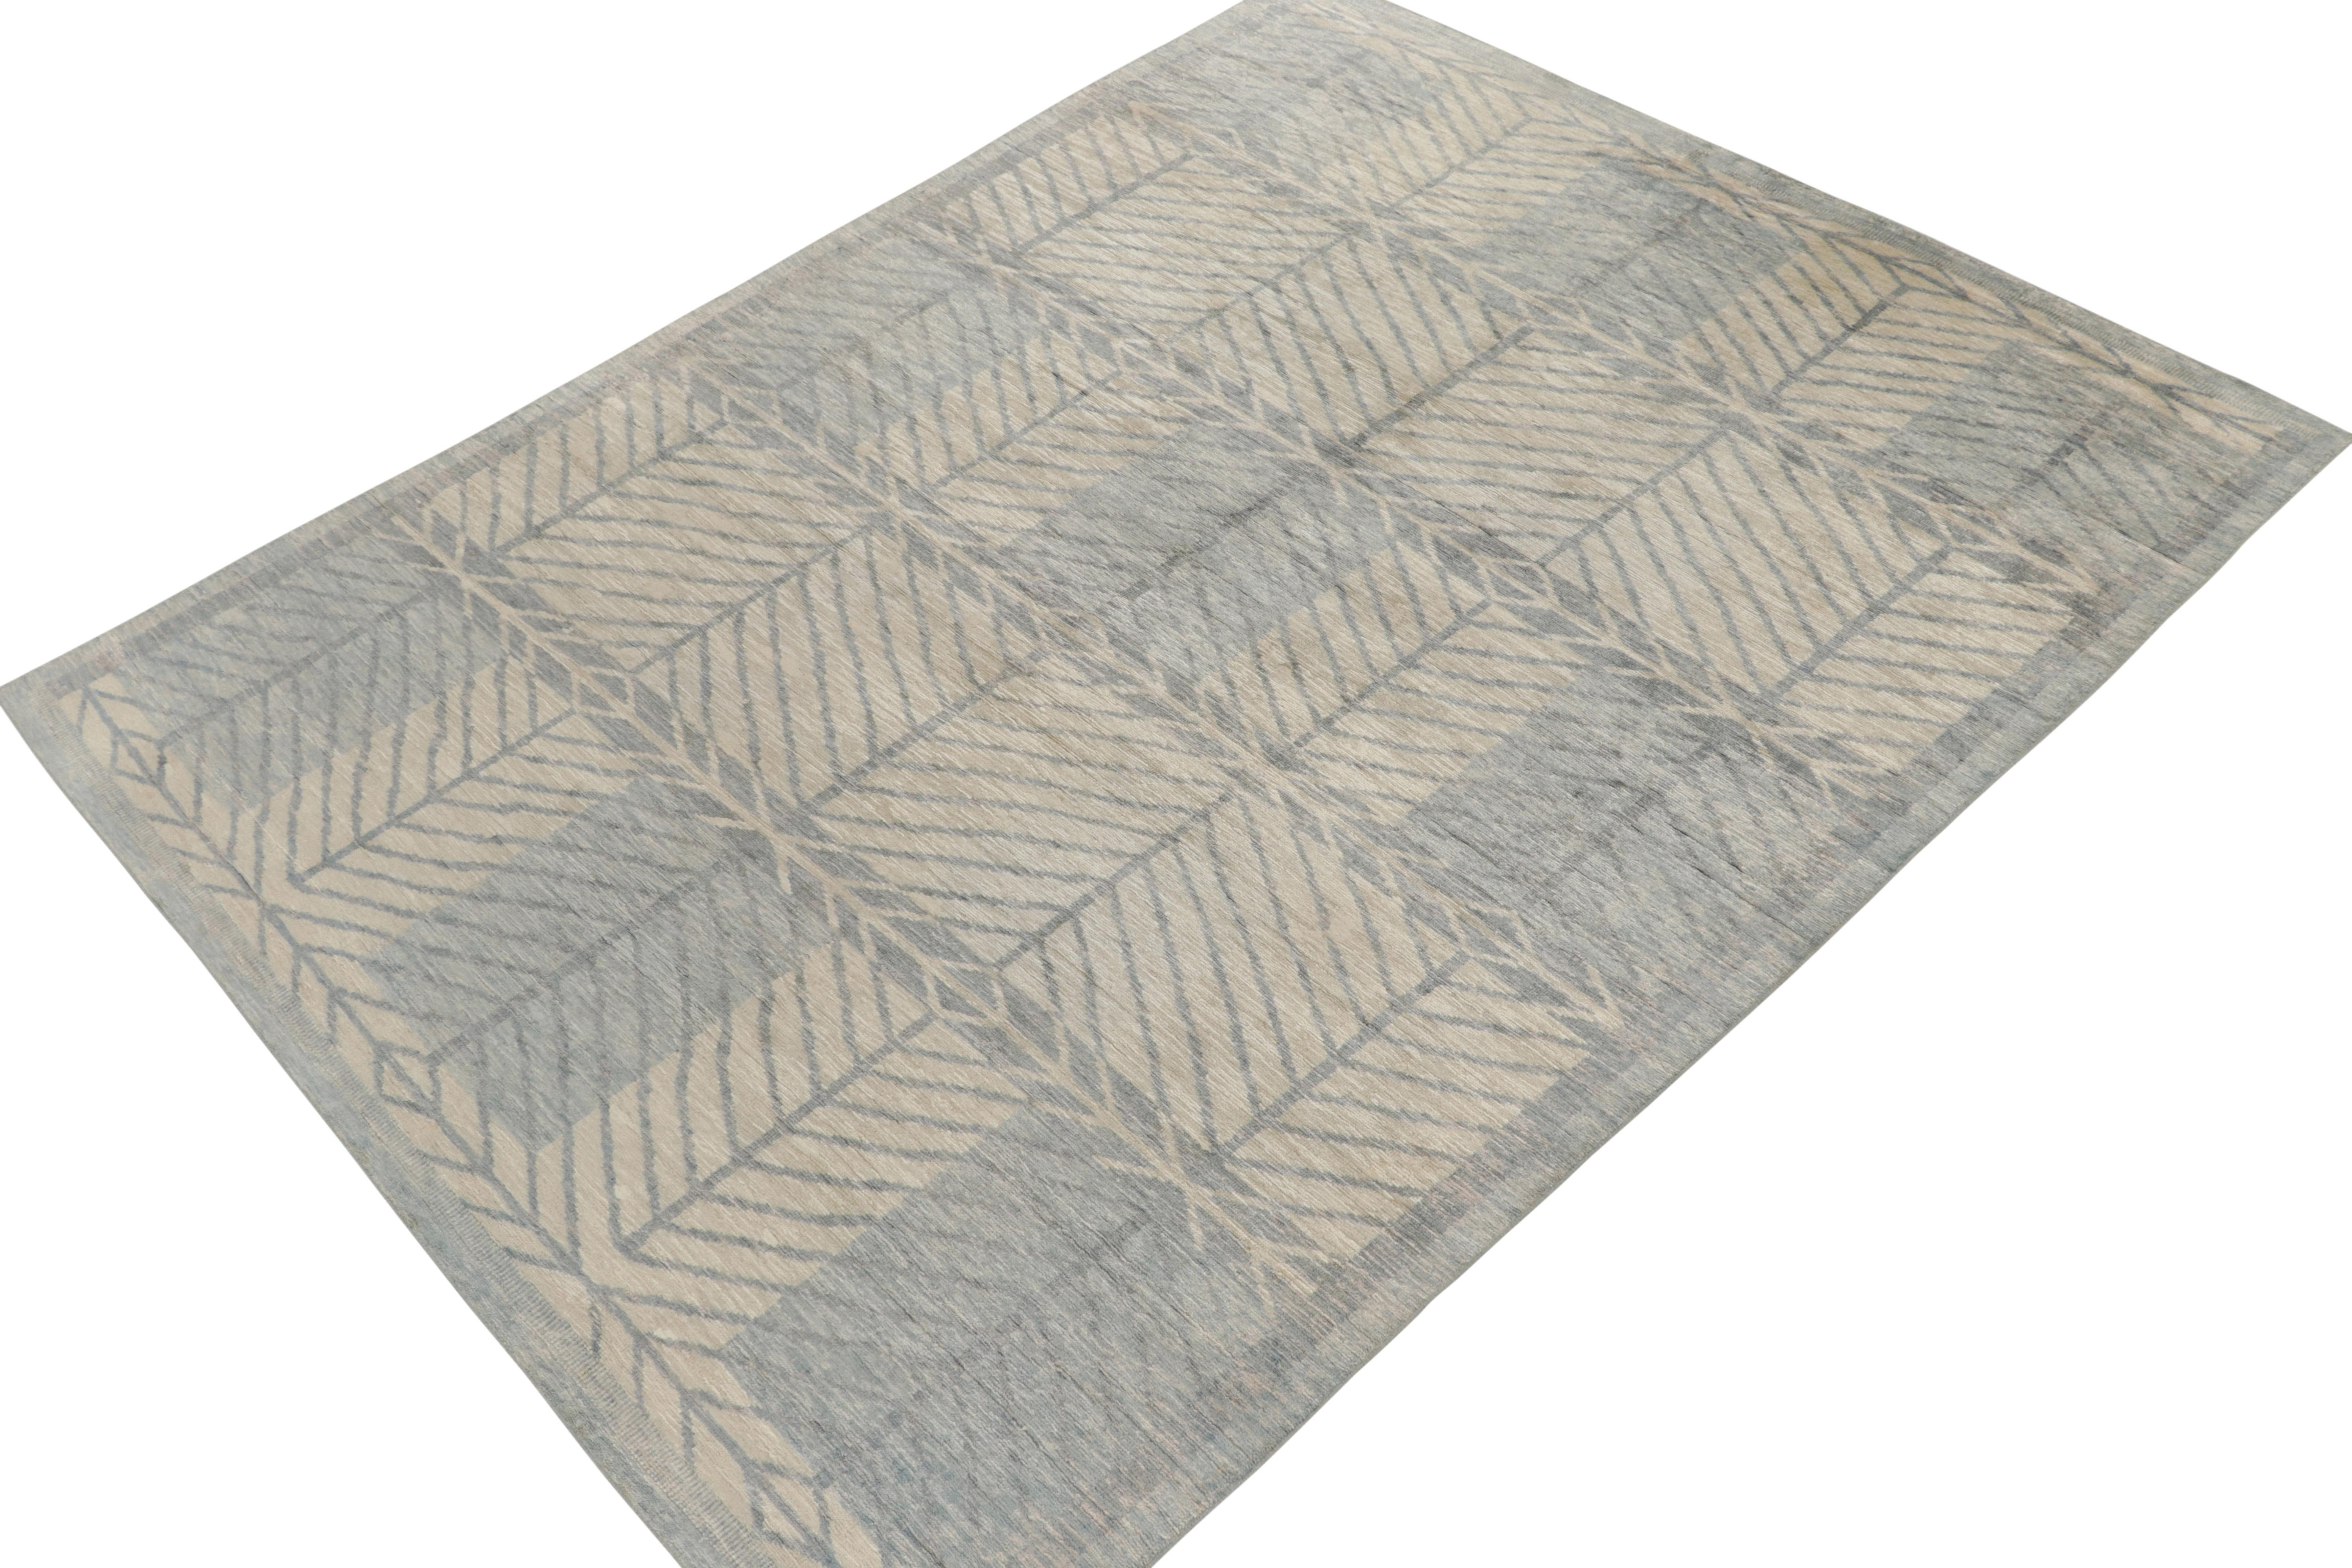 Hand-knotted in silk, from Rug & Kilim’s acclaimed Scandinavian rug collection reimagining the celebrated Mid-Century Modern style. 

This piece enjoys a defined Deco-style geometric pattern in cool blue, white and gray with tasteful striations